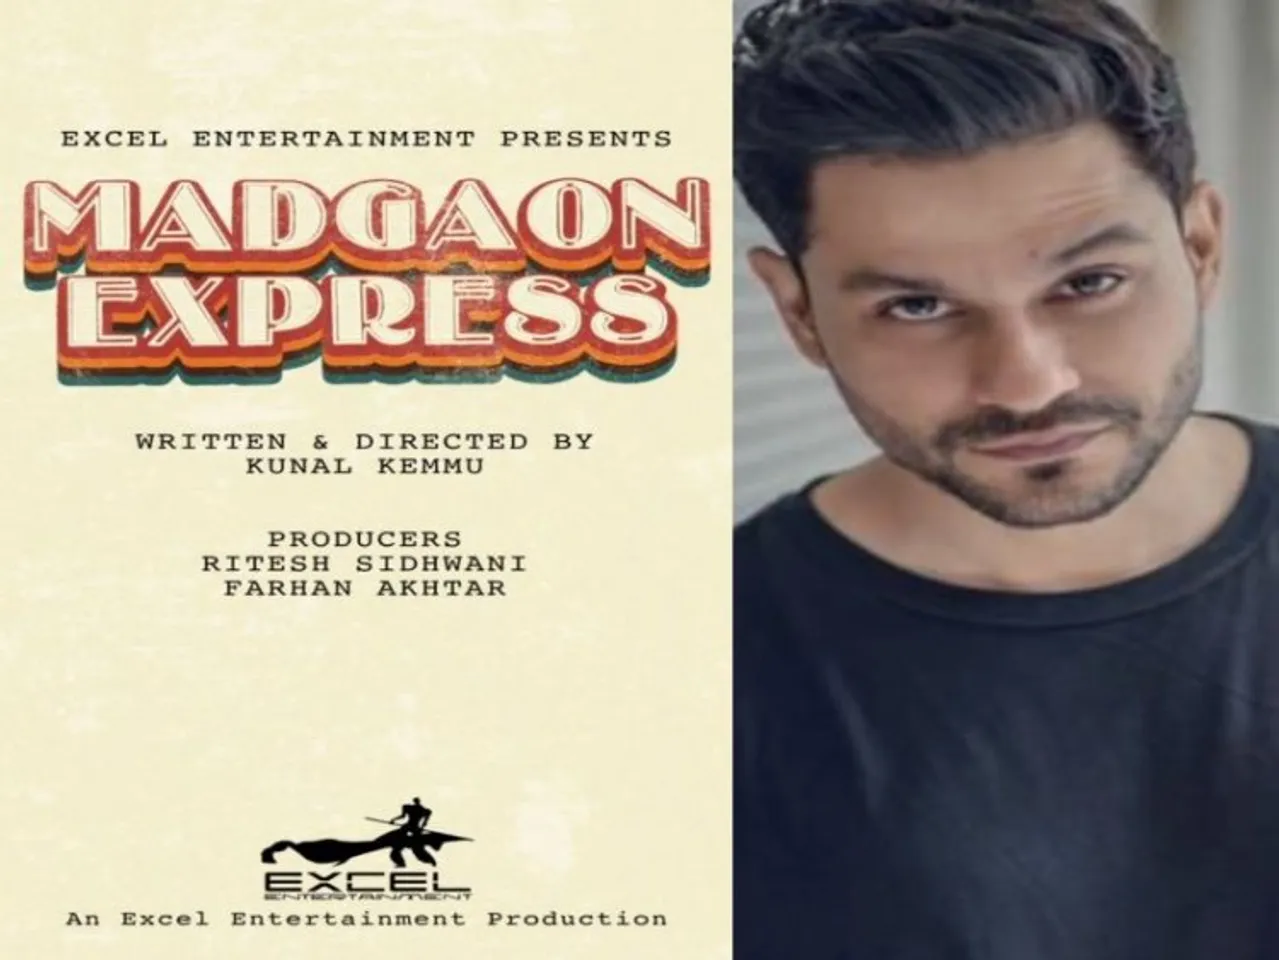 Kunal Kemmu announces directorial debut 'Madgaon Express' with Excel Entertainment